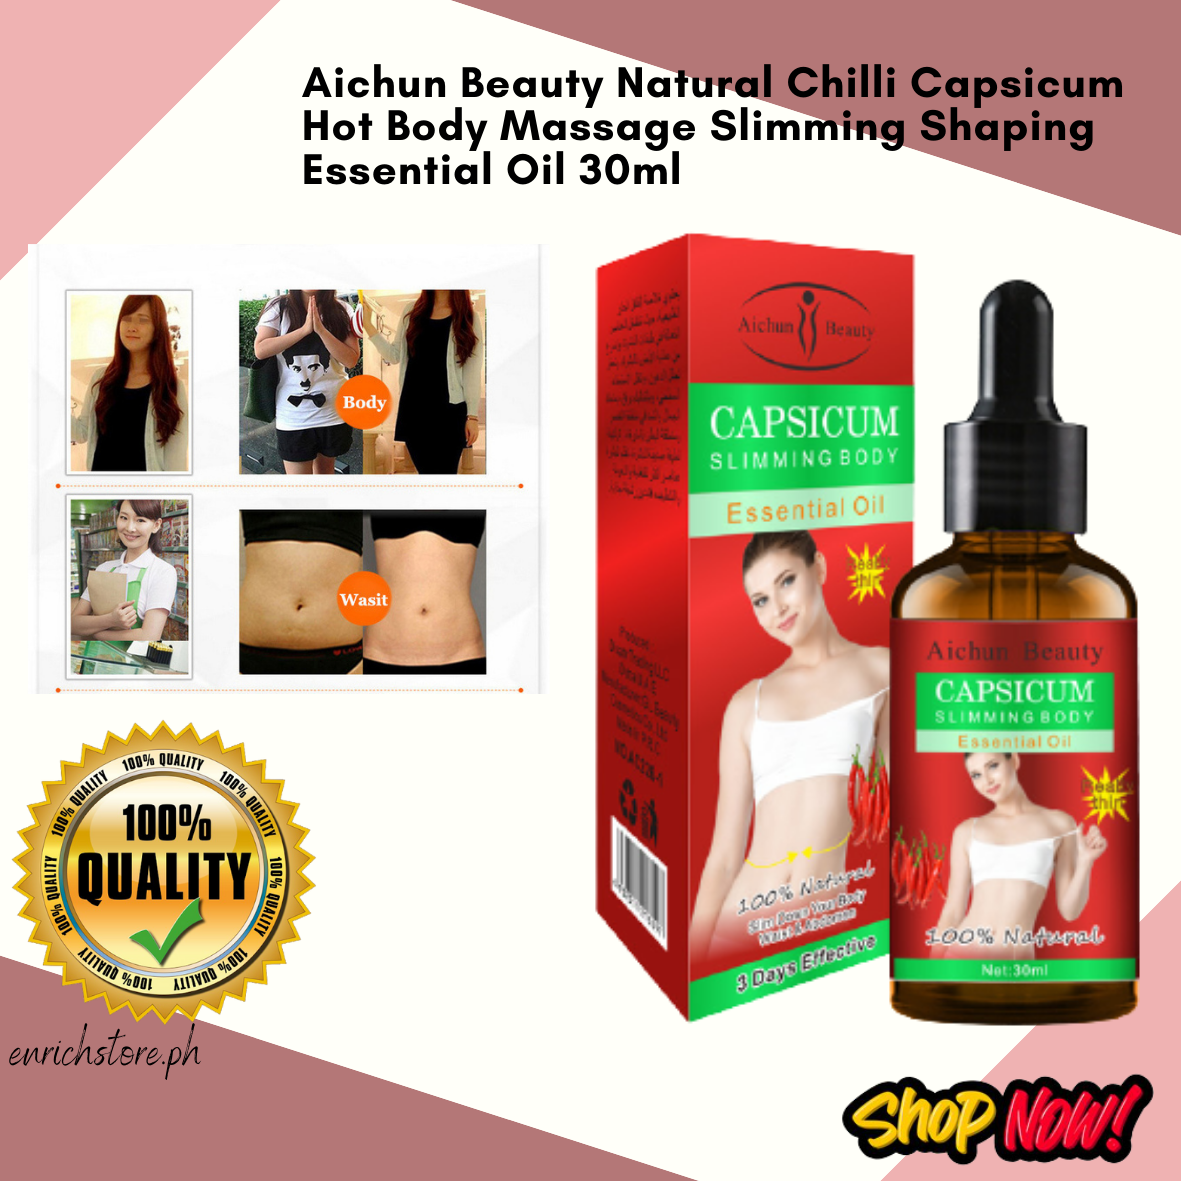 AICHUN BEAUTY CAPSICUM Slimming Body Essential Oil 100% Natural 3 Day  Effective 30ml